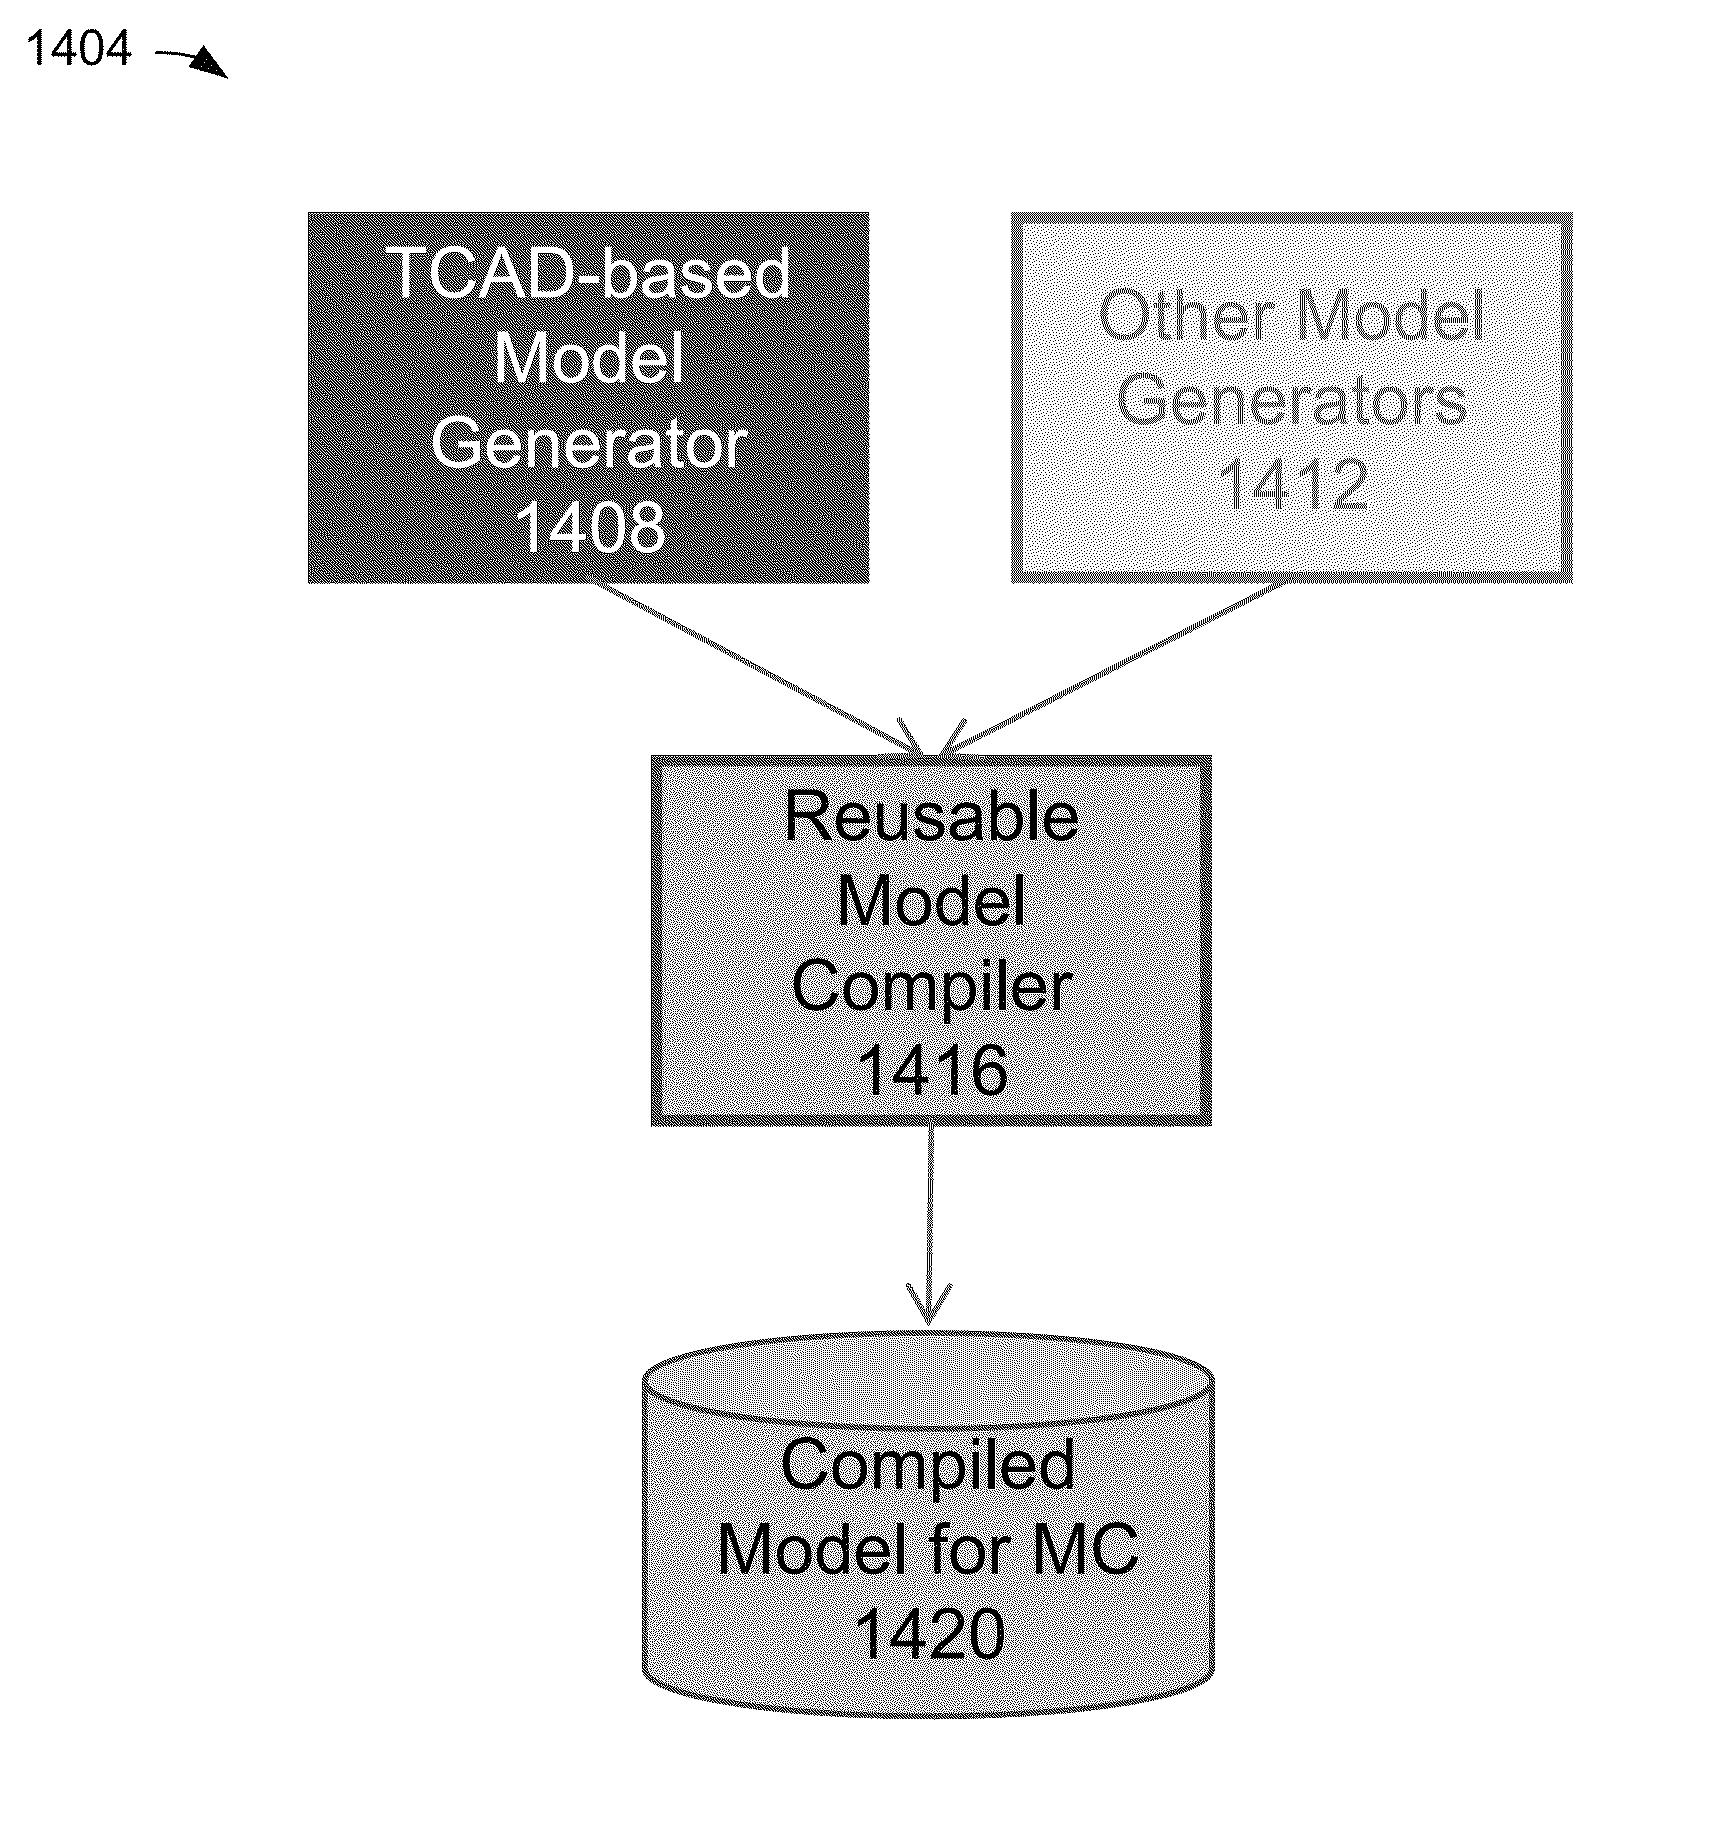 Hierarchical variation analysis of integrated circuits